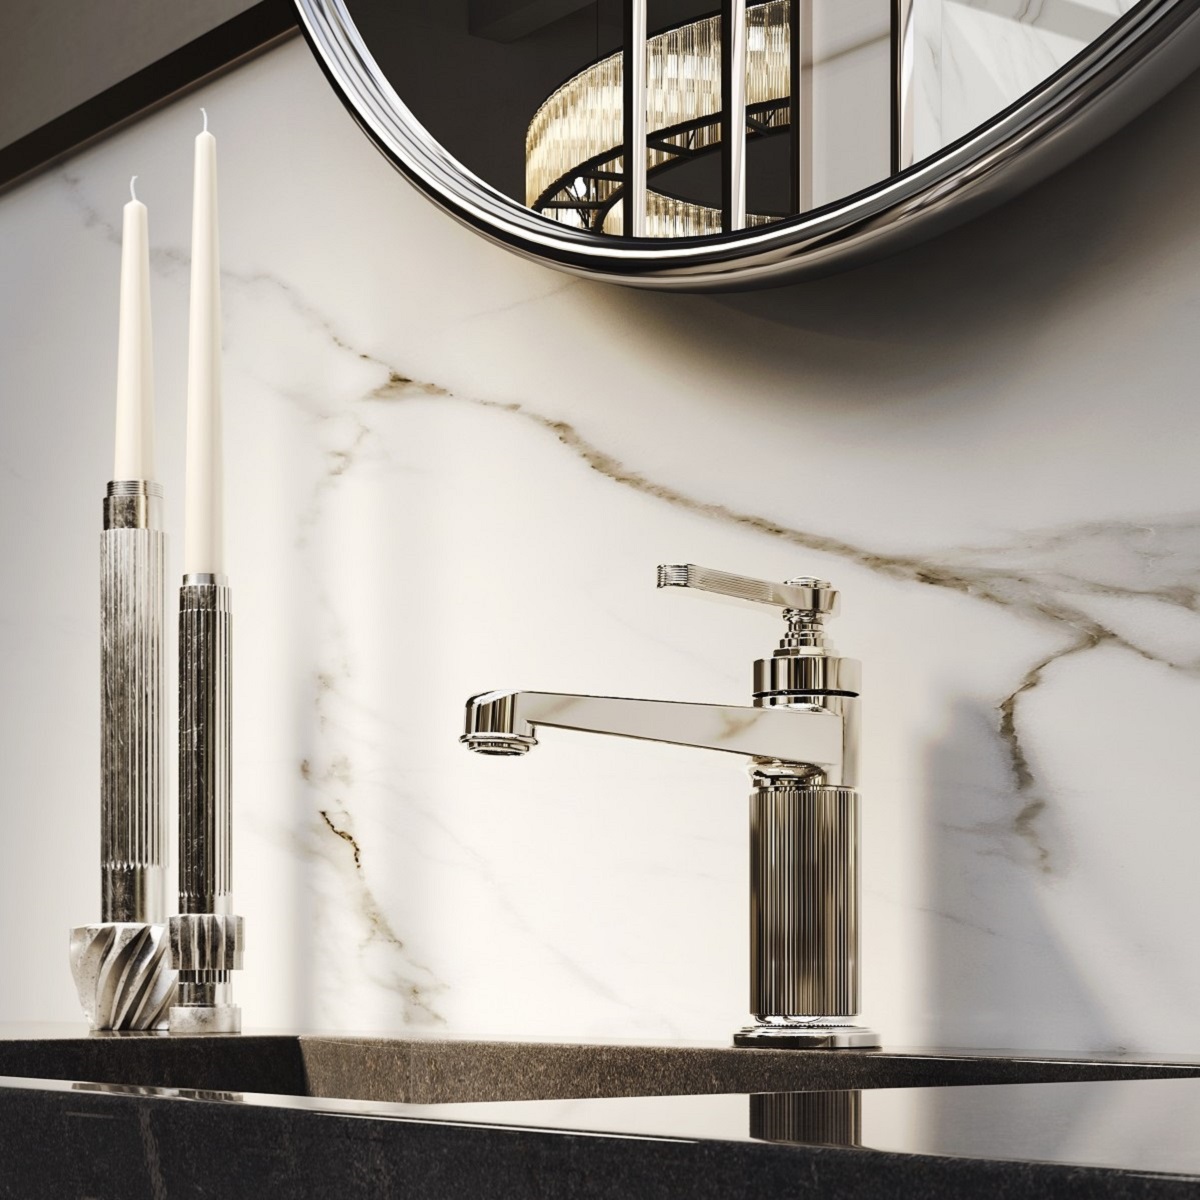 Gessi Venti20 tap on black sink with marble background